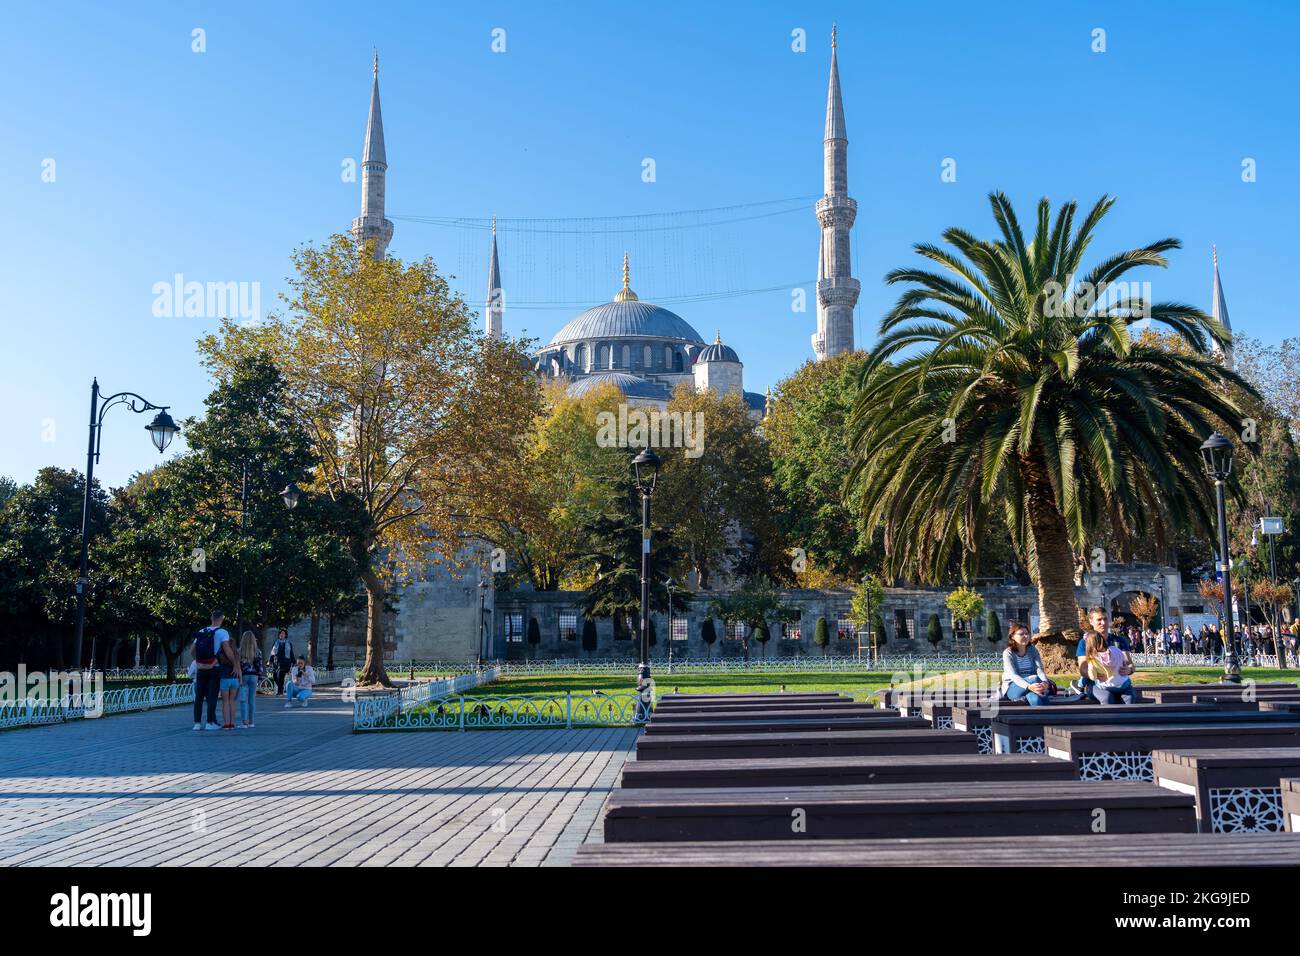 Blue Mosque also known as Sultan Ahmed Mosque an Ottoman era historical imperial mosque located in Istanbul.it undergoes major structure renovation. Stock Photo